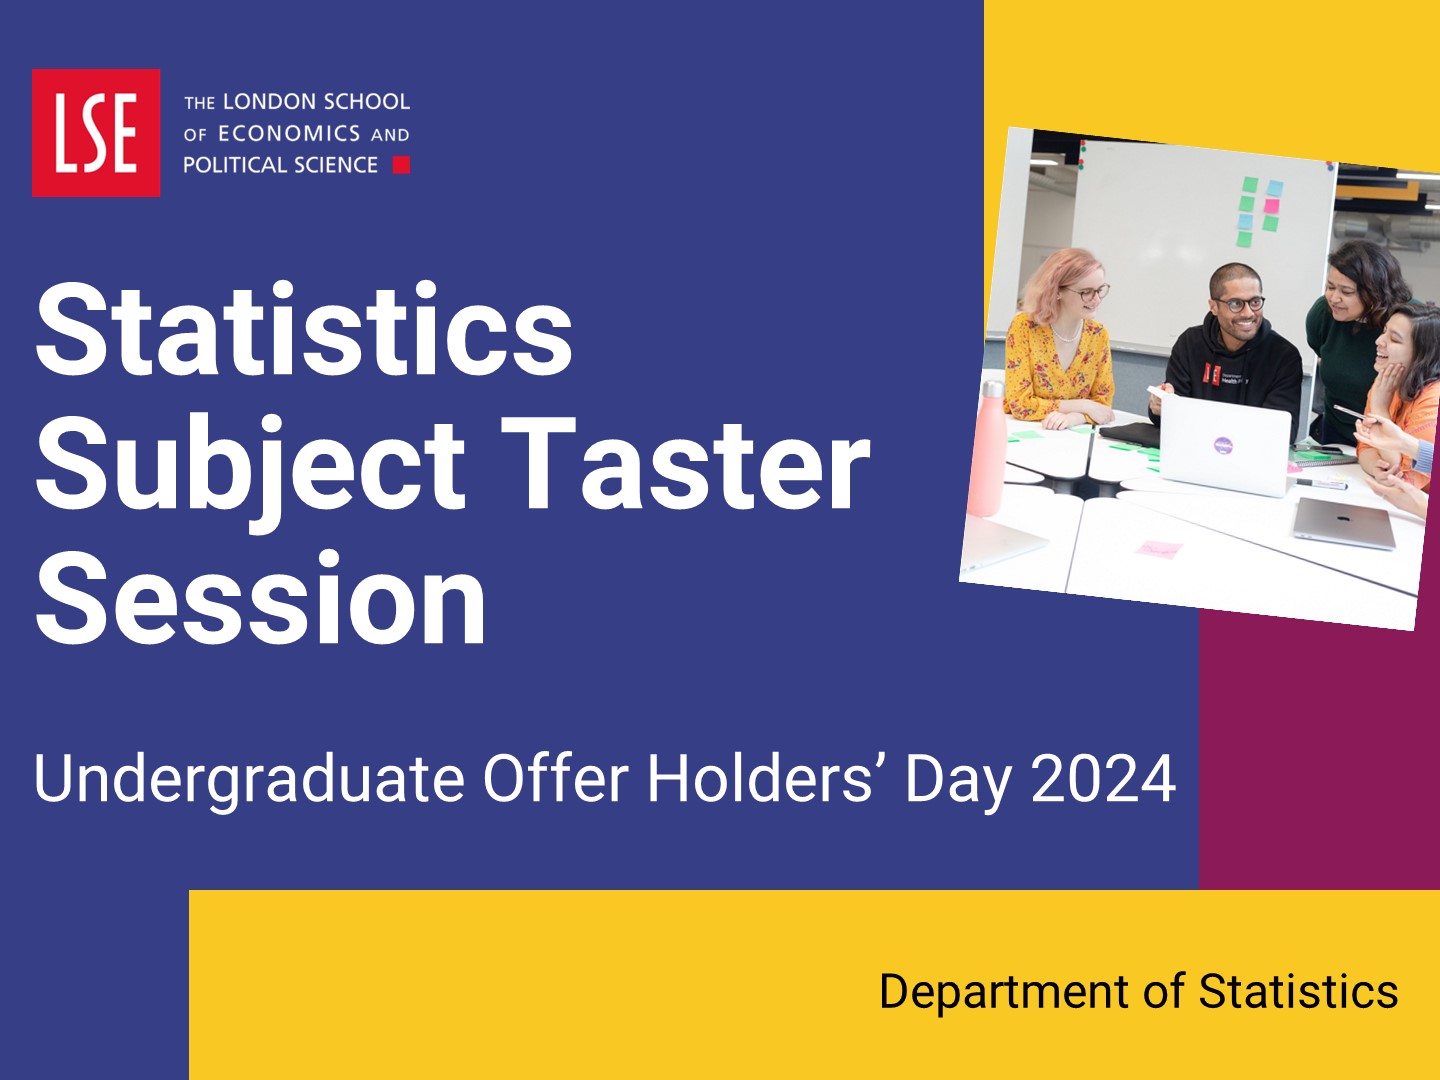 Watch the statistics subject taster session